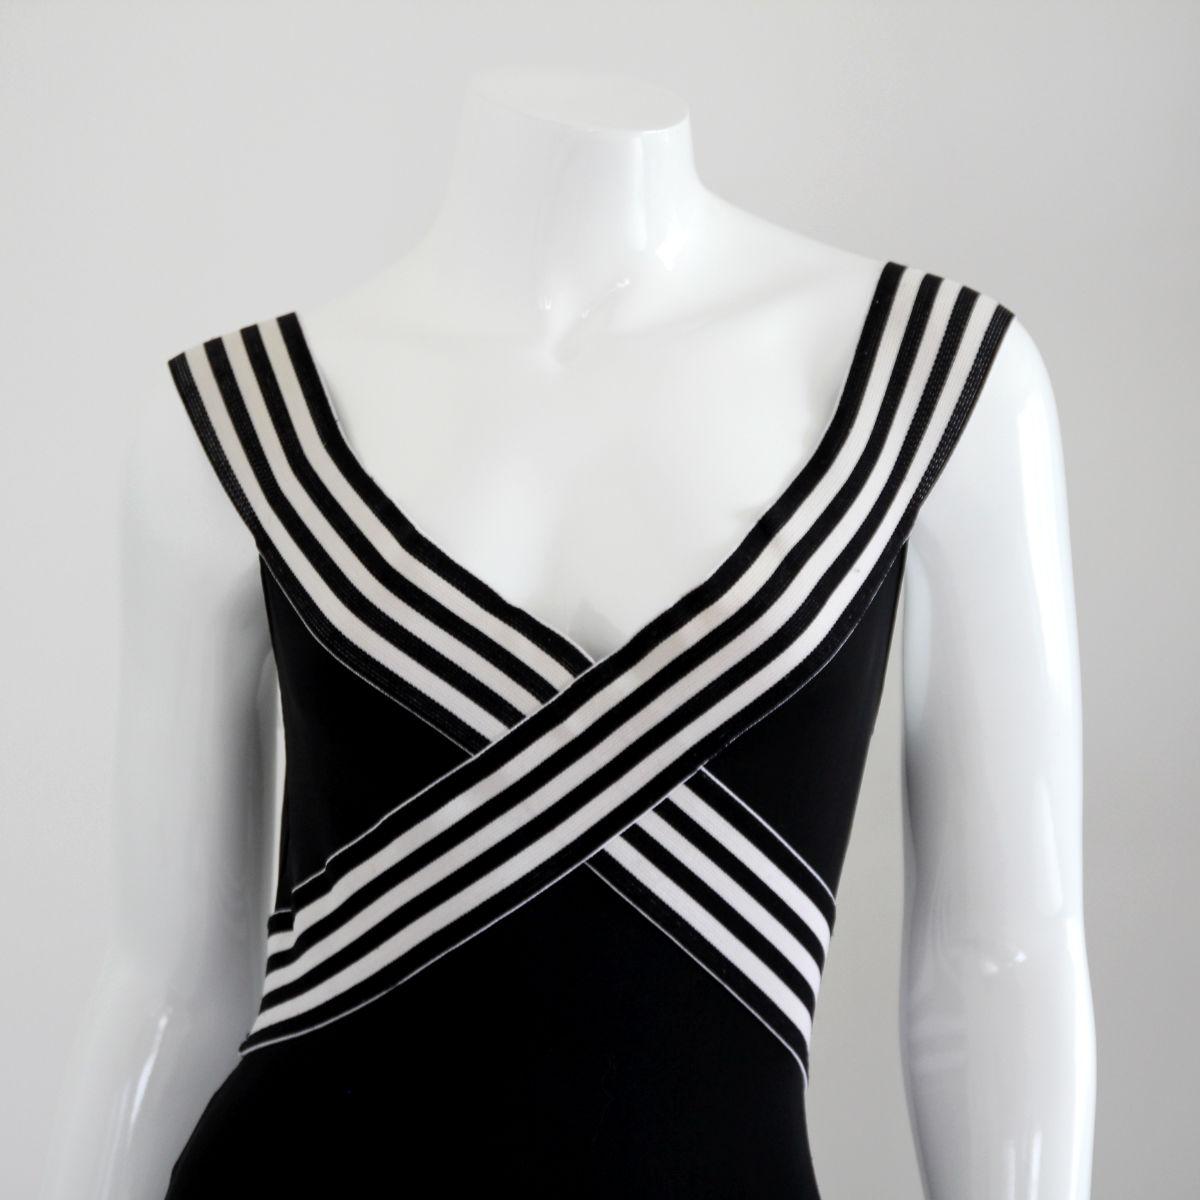 HERVÉ LEGER

1990s. Noble, exceptional swimsuit by Hervé Leger.

Buy Now Or Cry Later! 

The swimsuit is in very good condition (see photos).